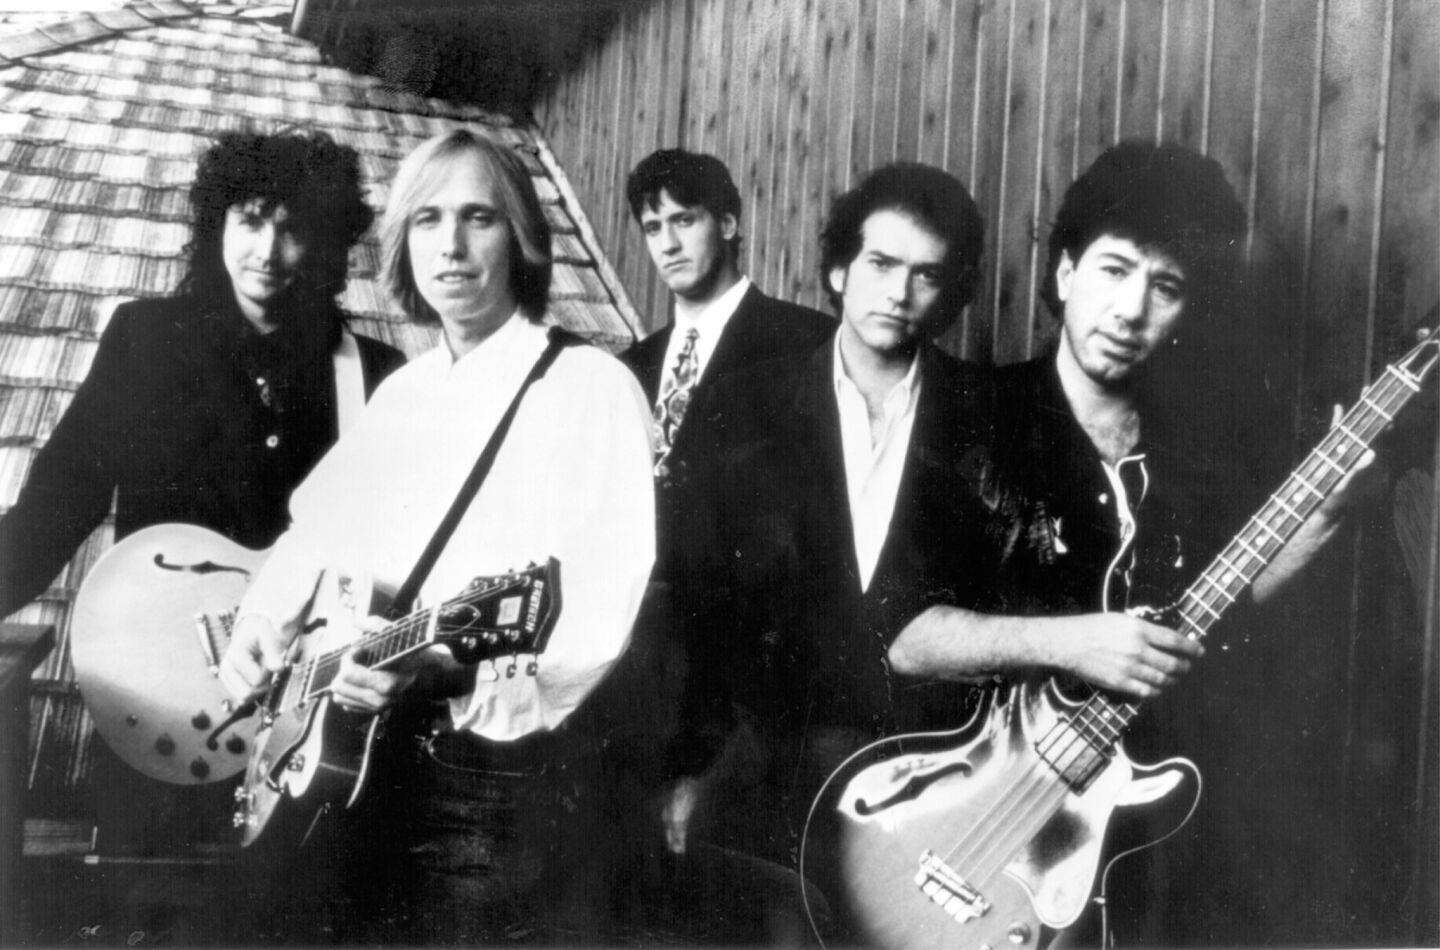 Mike Campbell, left, Tom Petty, Stan Lynch, Benmont Tench and Howie Epstein of Tom Petty and the Heartbreakers on Nov. 28, 1993.